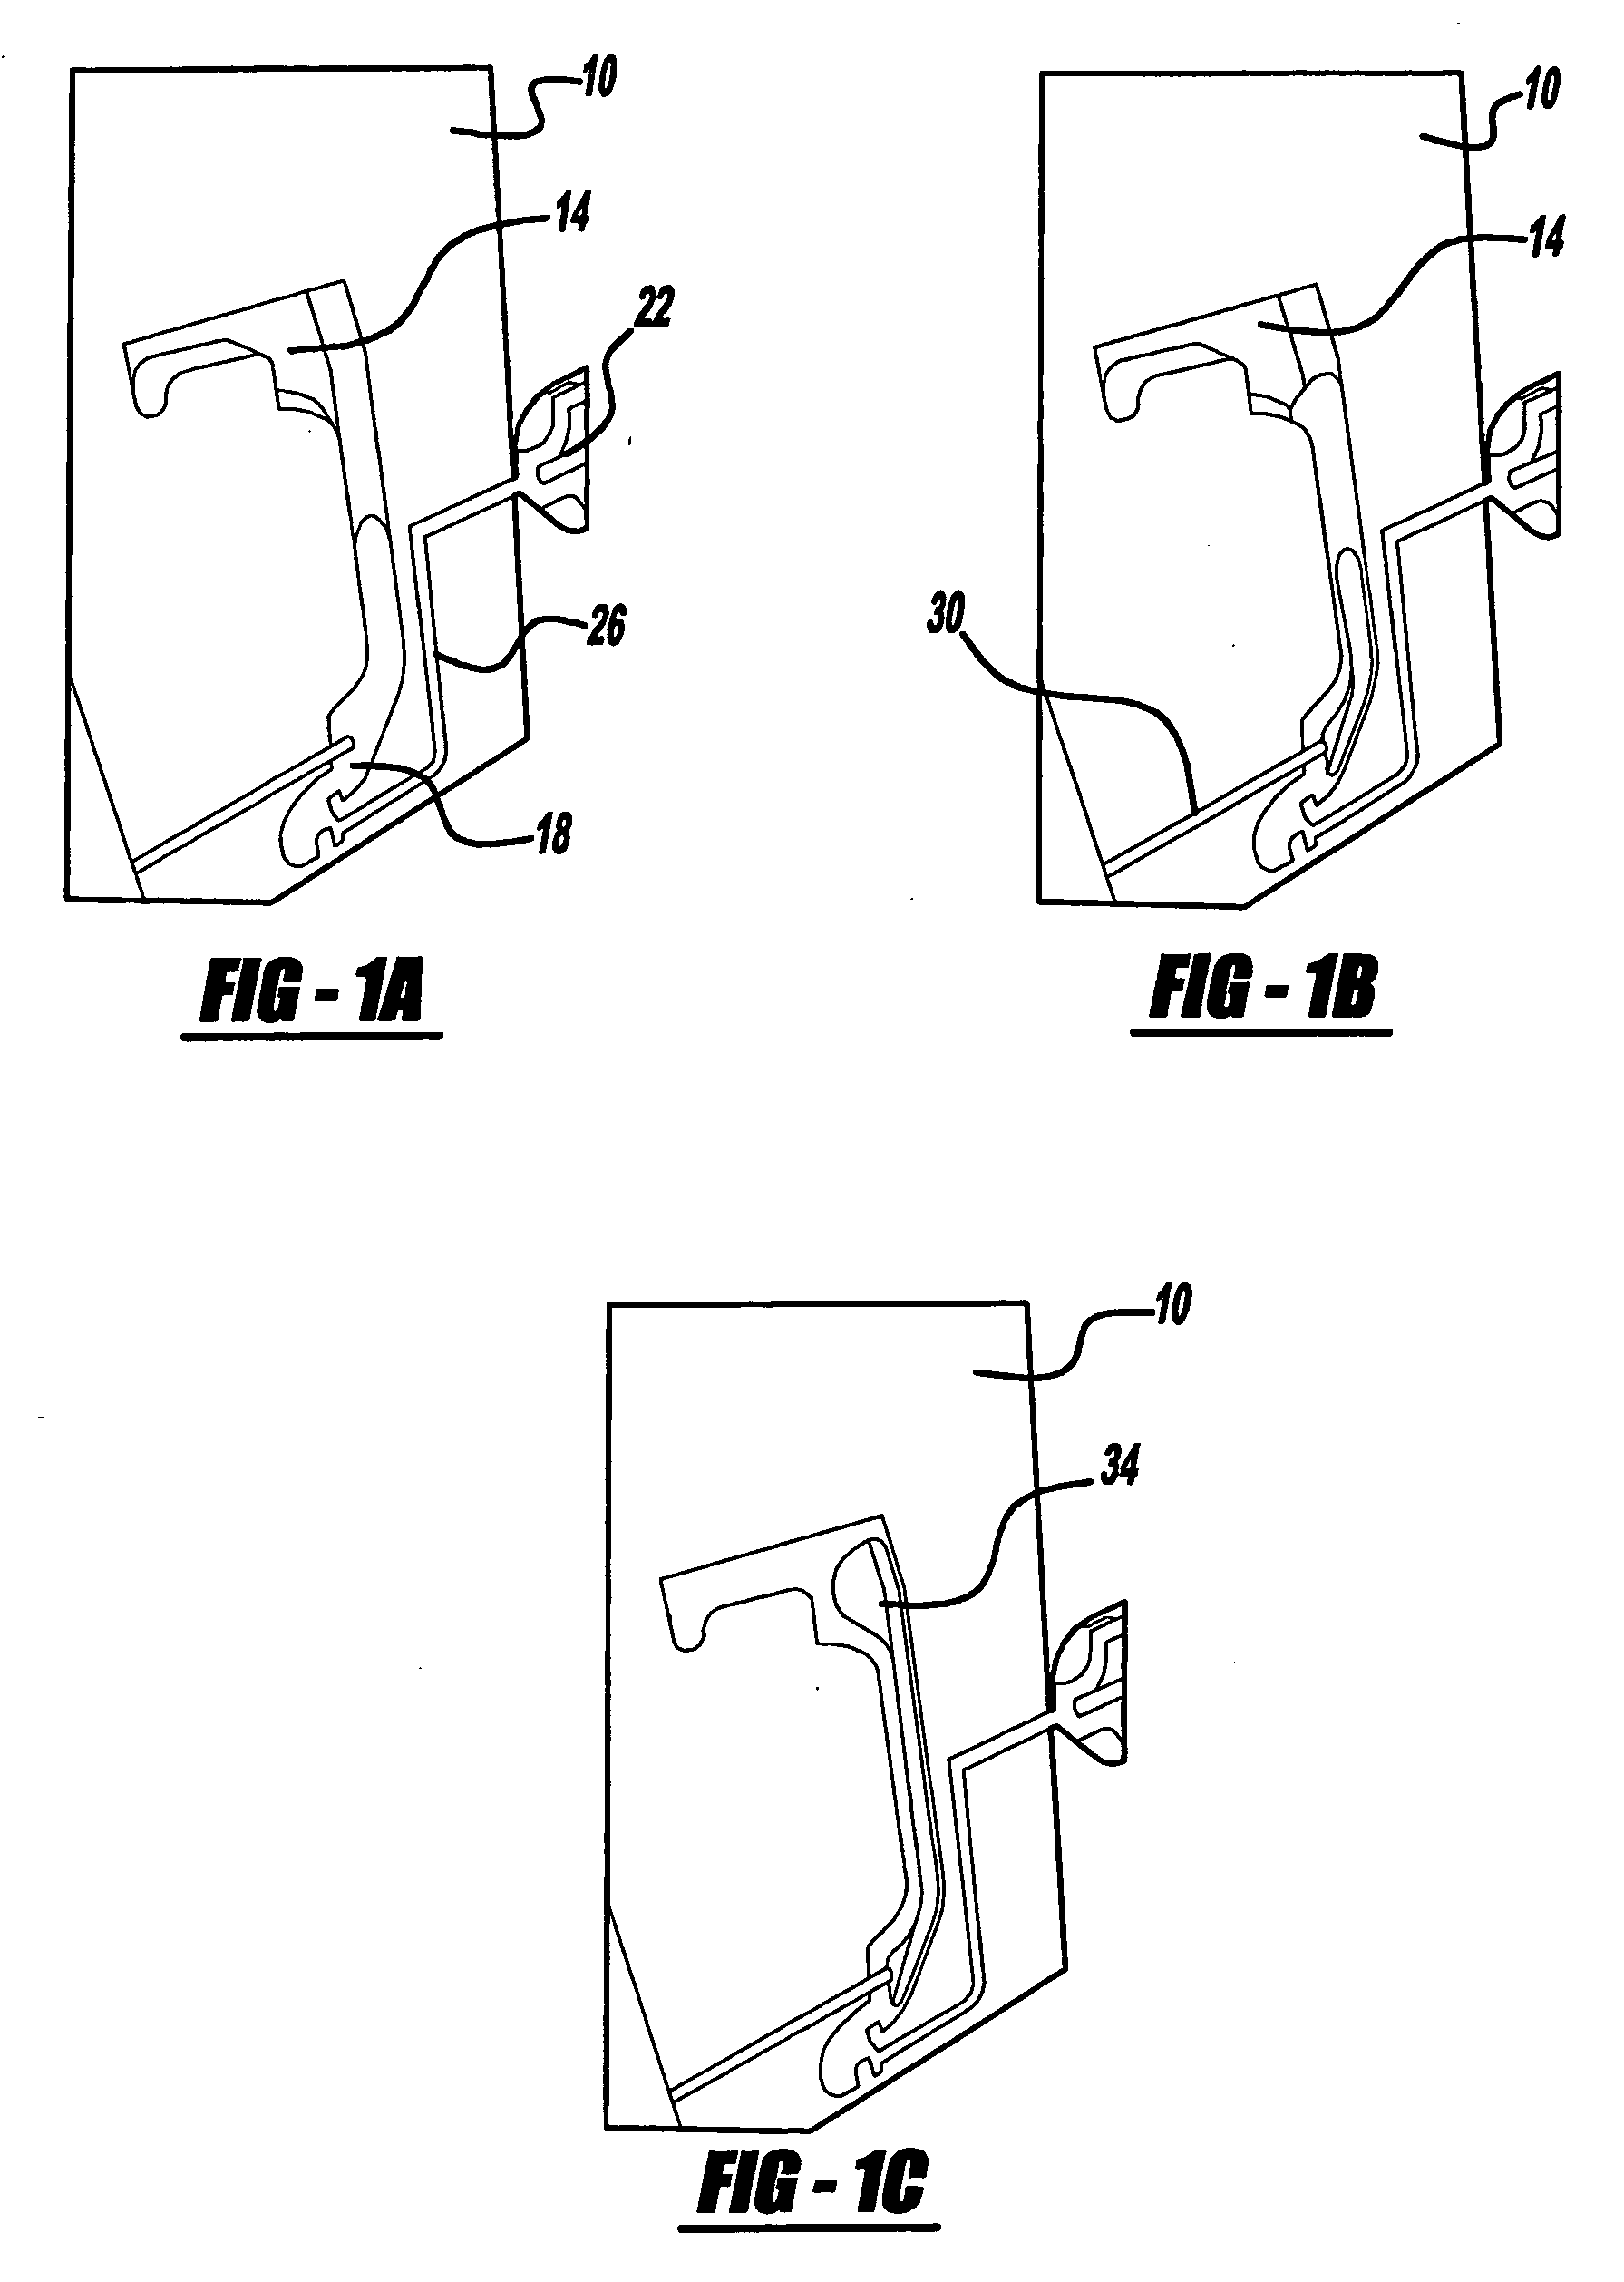 Water-assist injection molded structural members